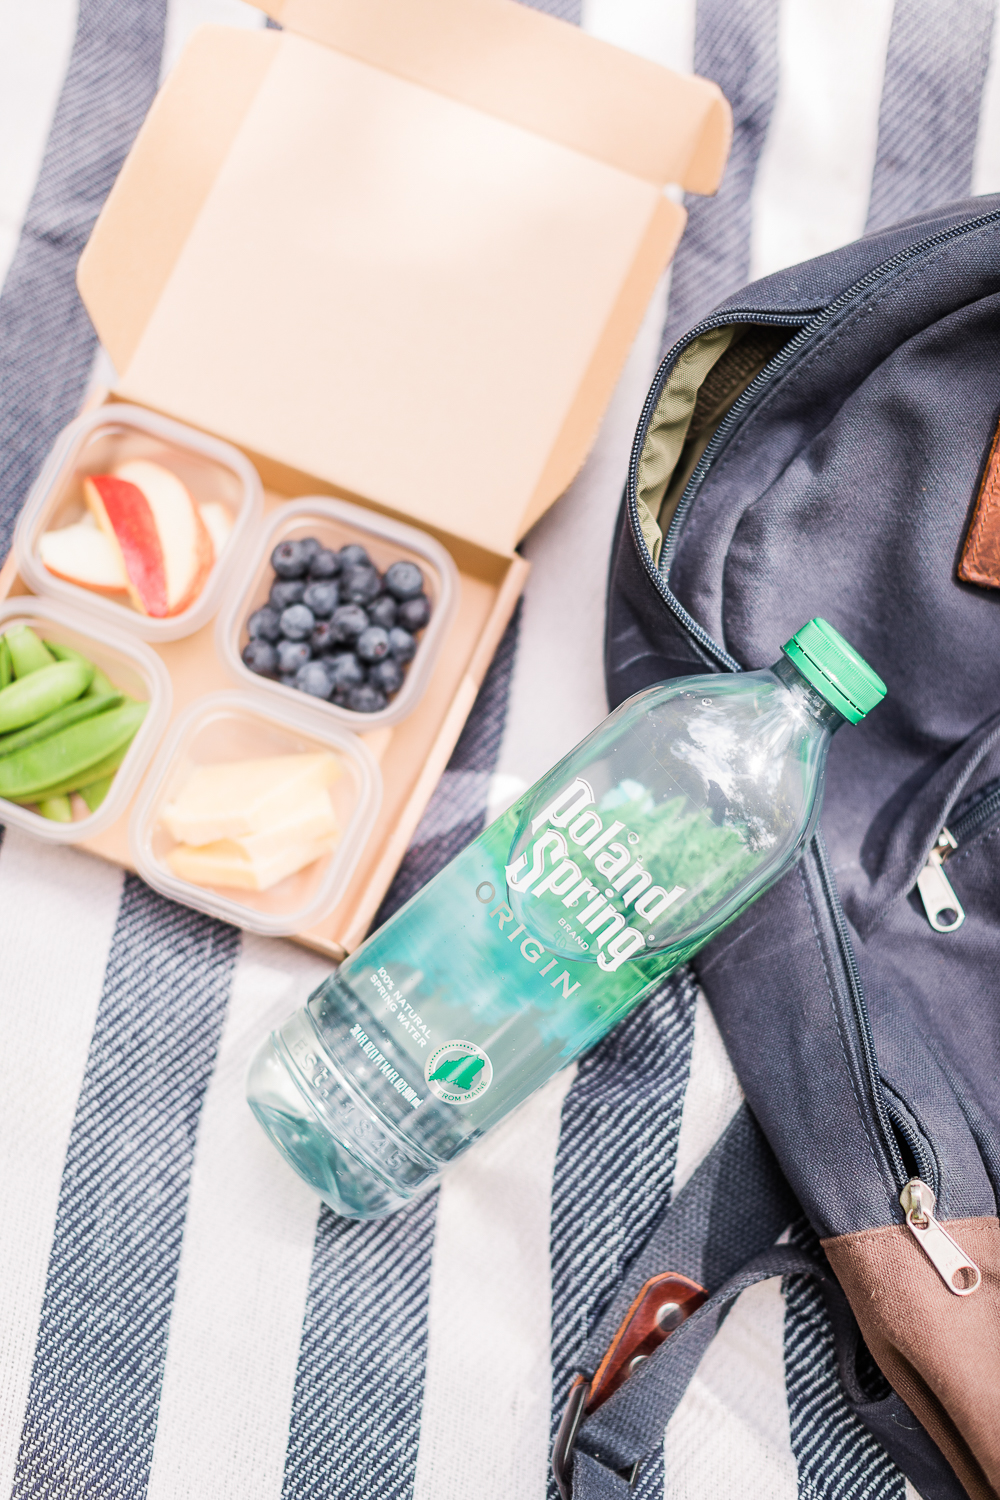 summer hiking essentials, what to bring hiking, Poland Spring Origin Natural Spring Water at Walmart, Summer Adventuring: How to Plan the Perfect Hiking Picnic by popular midwest blogger Stephanie Ziajka from Diary of a Debutante, Columbia MO hiking